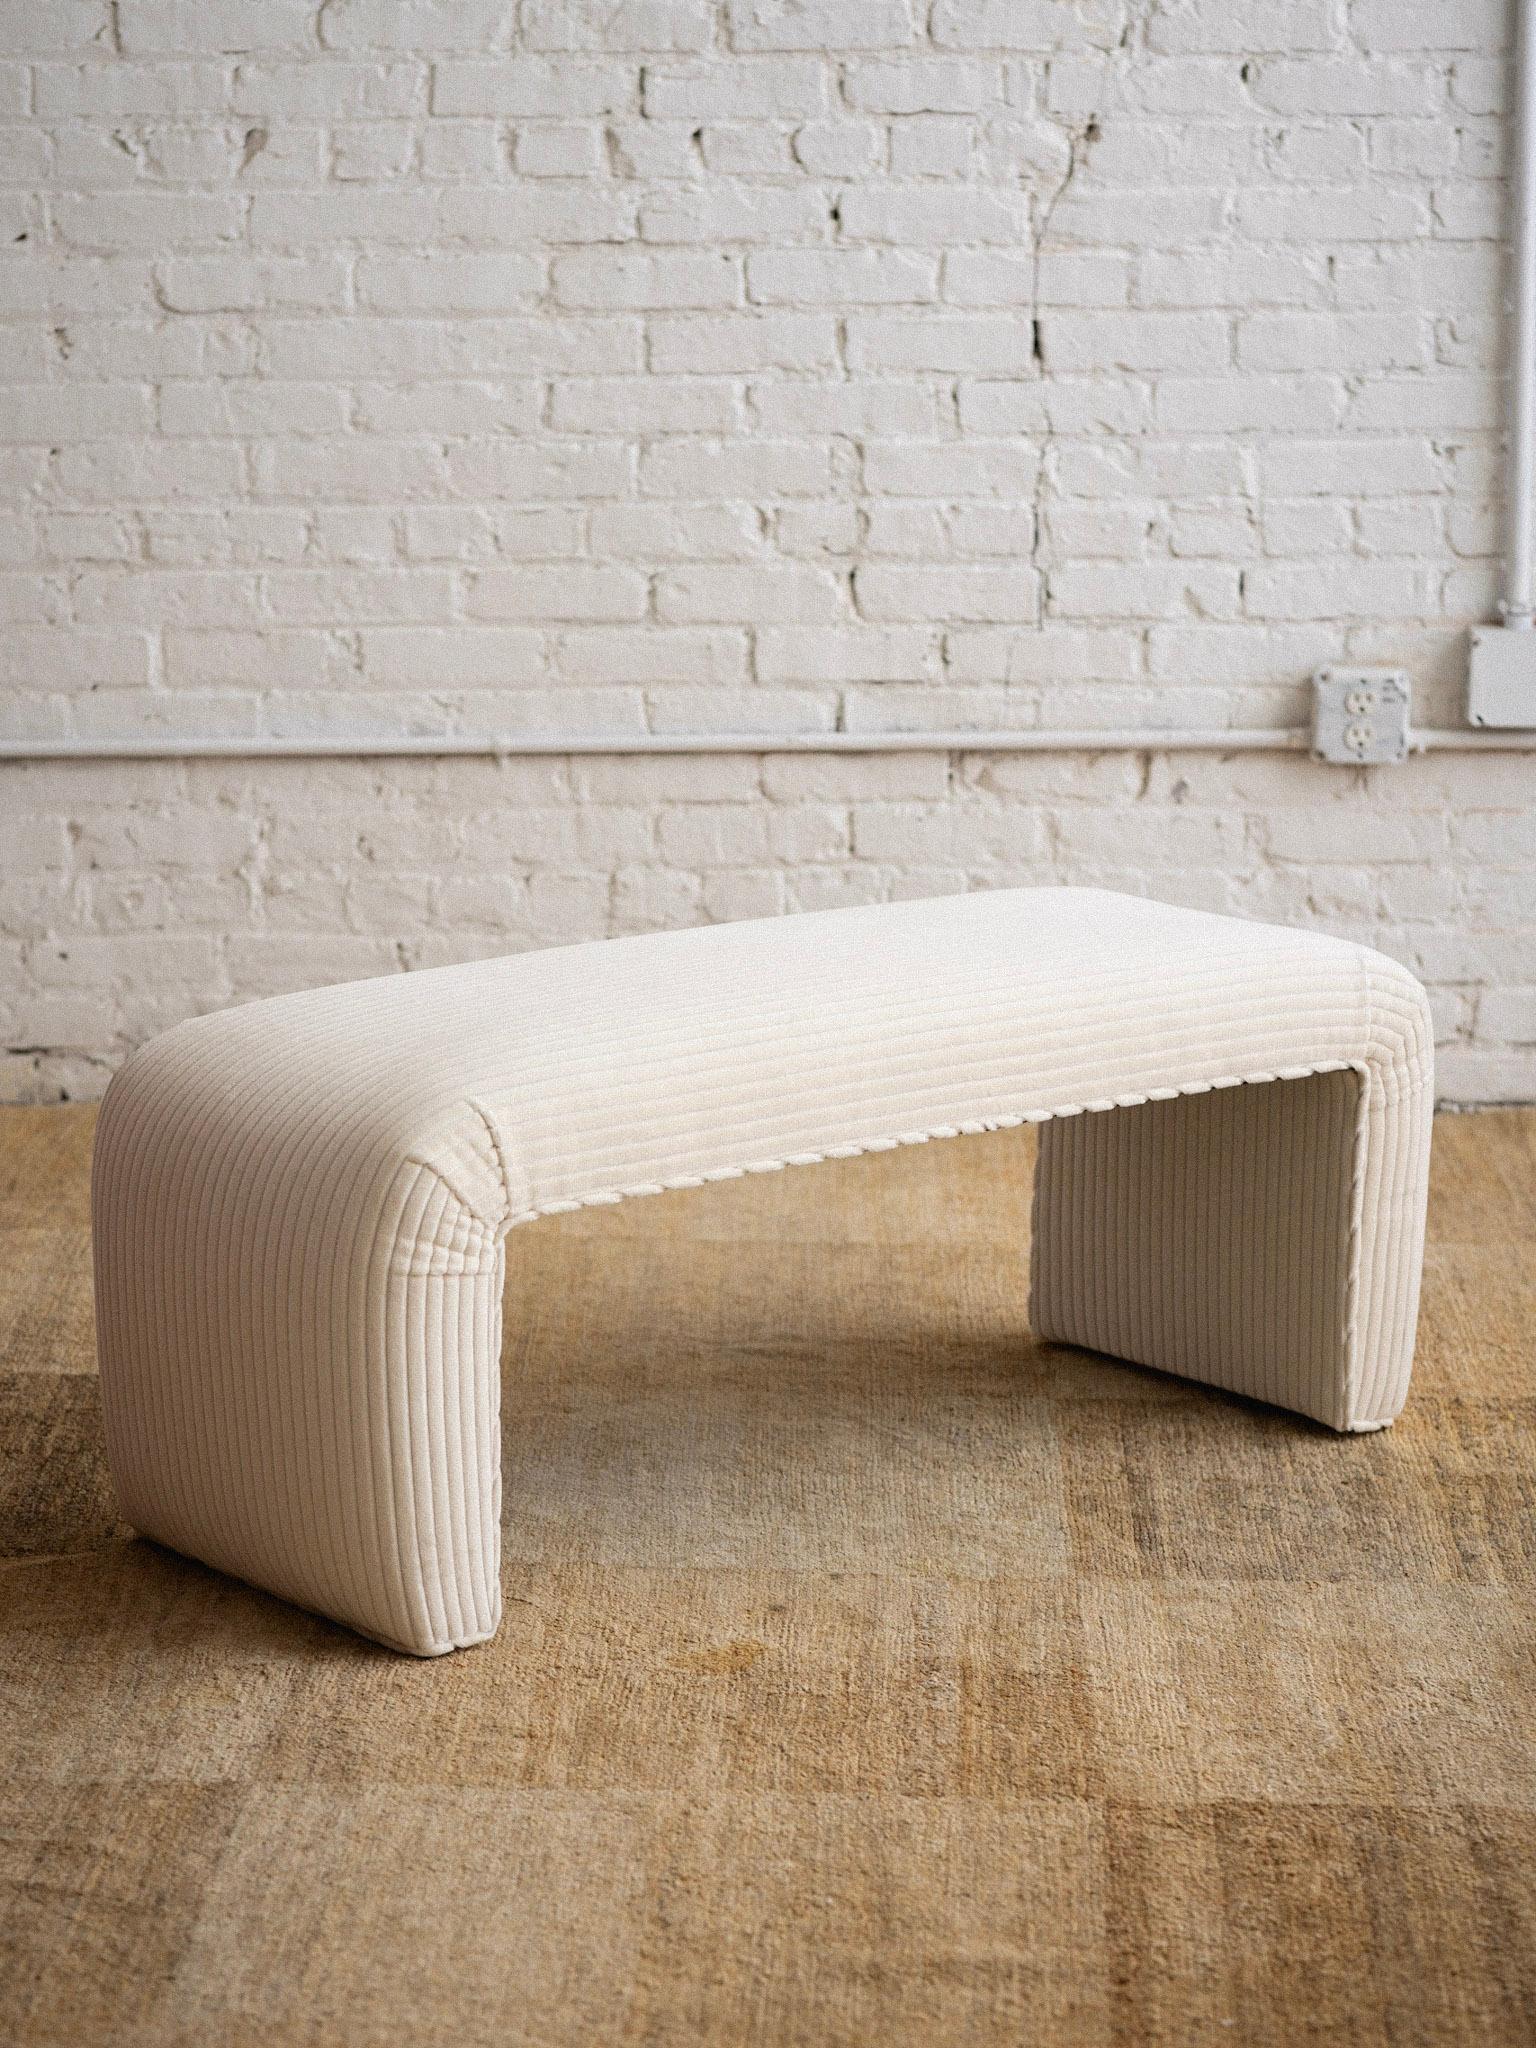 A waterfall bench upholstered in a cream velvet corduroy fabric.